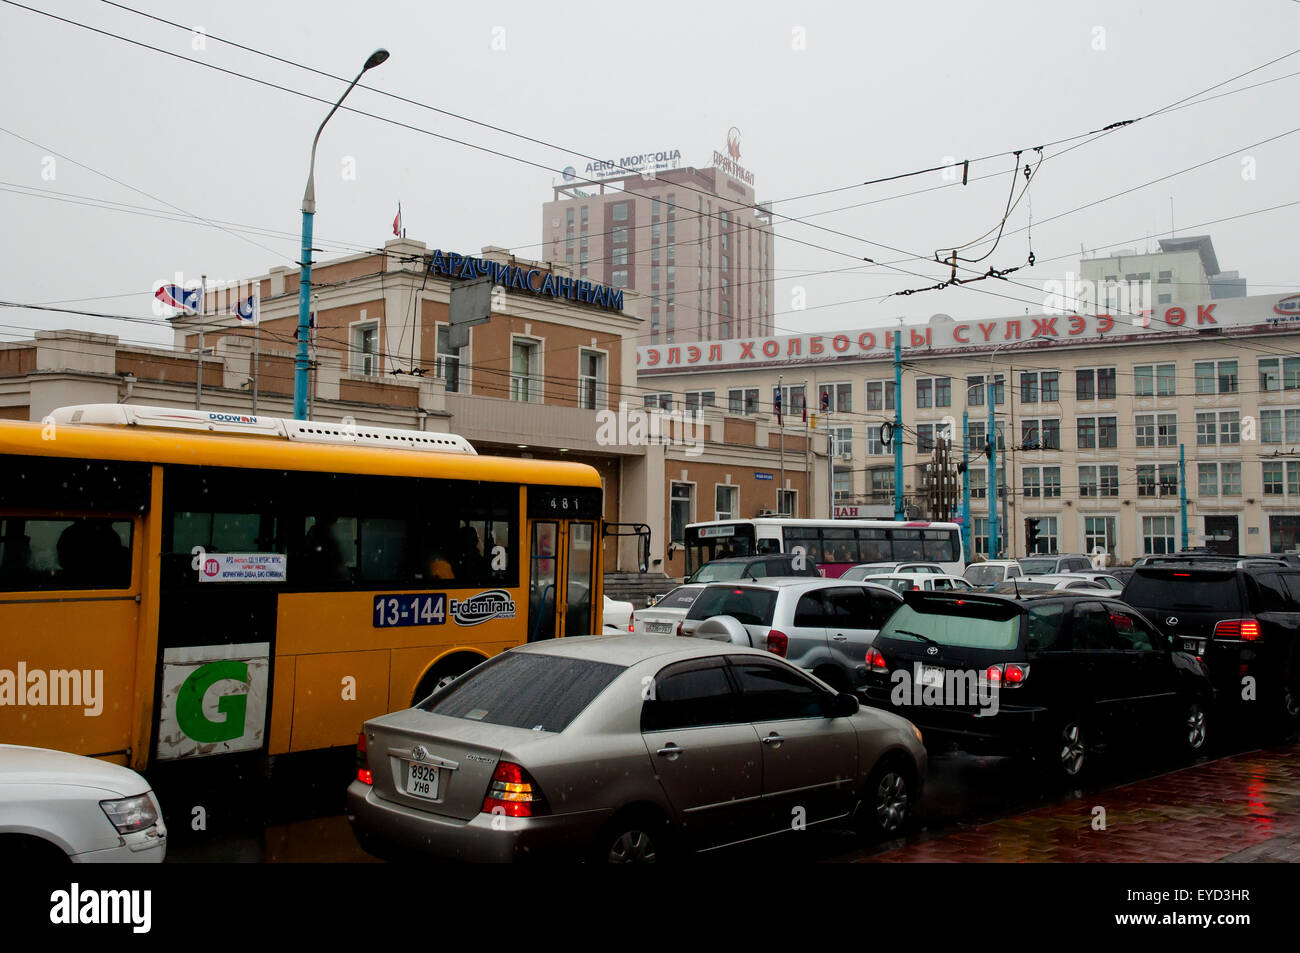 Daily traffic on Olympic Street on a snowy day in the capital city - Ulaanbaatar - Mongolia Stock Photo